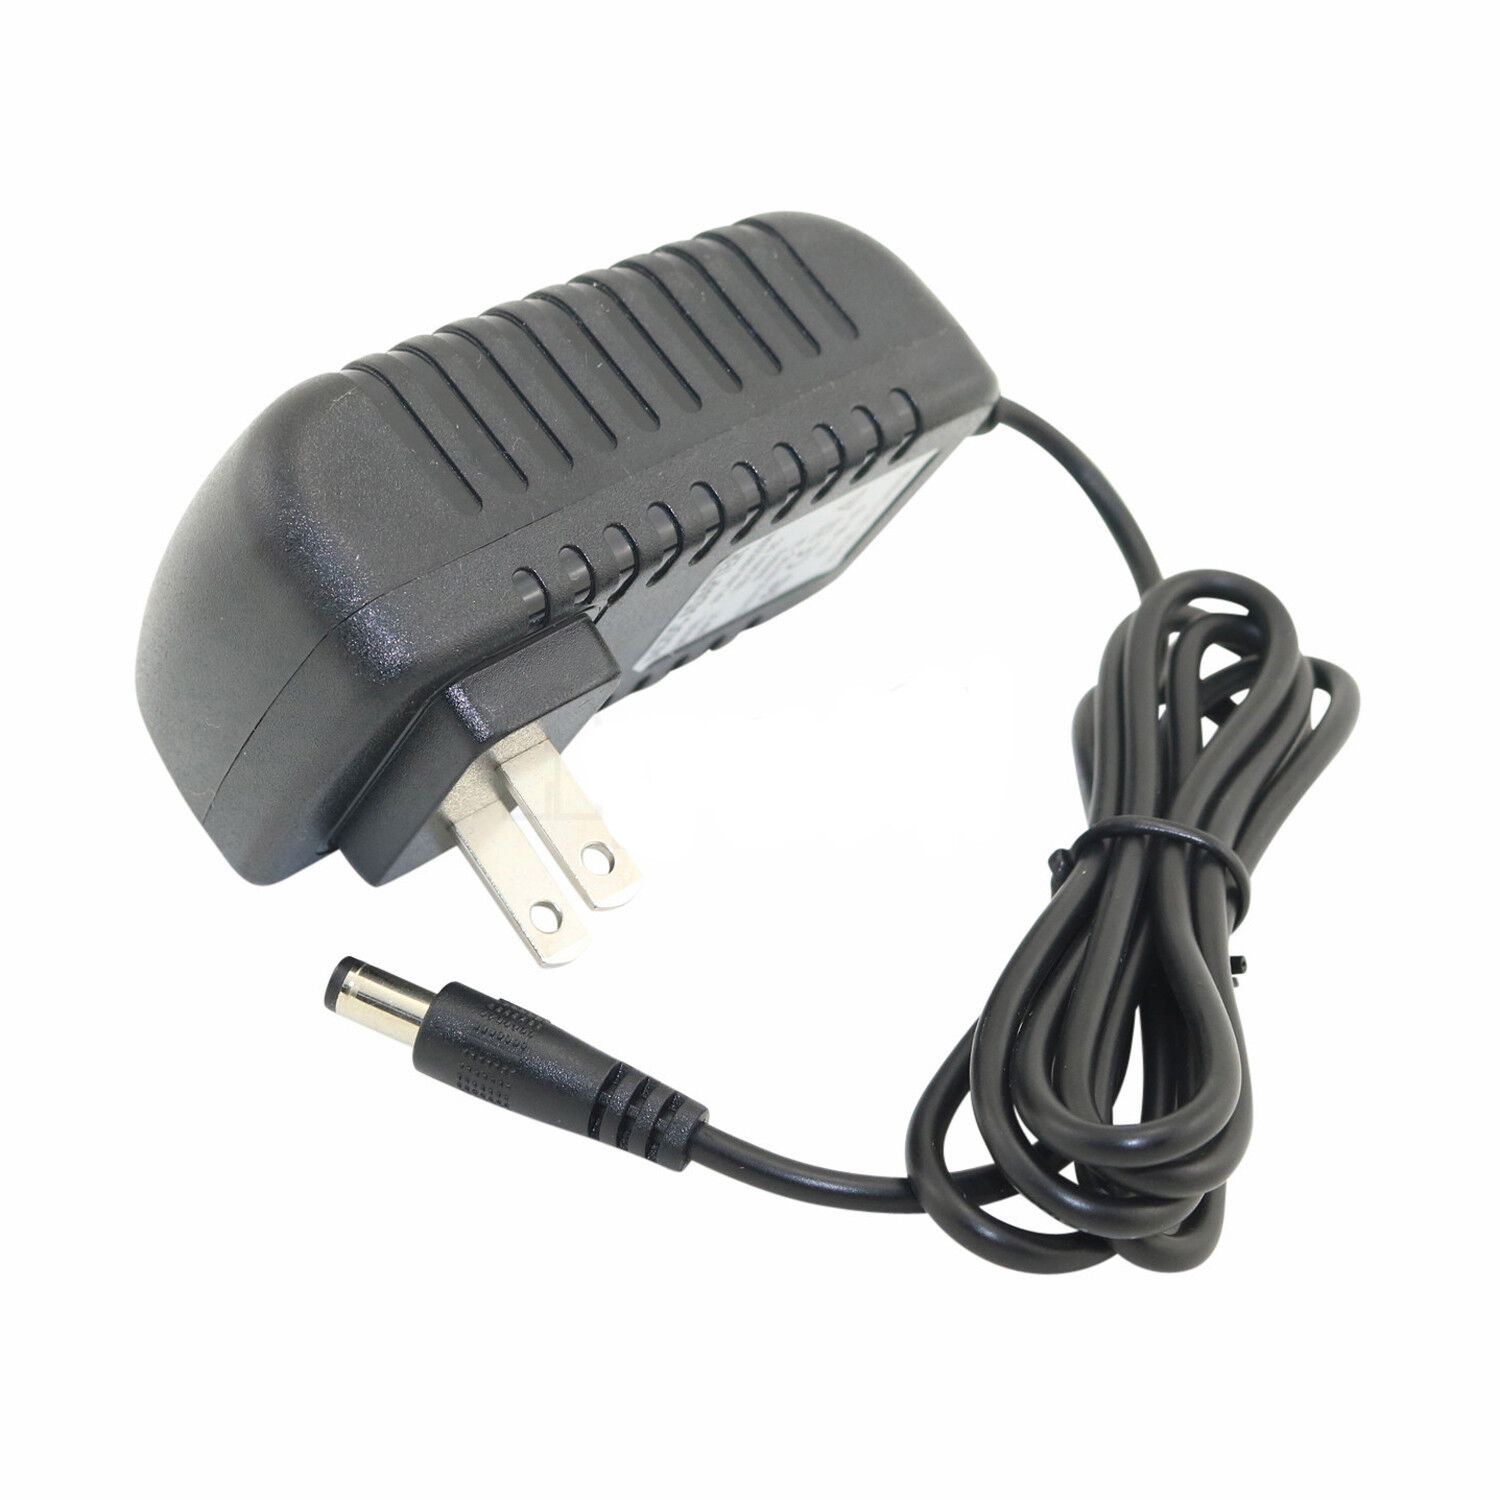 *Brand NEW*25.2V 0.6A 2500mAh AC Adapter Charger Power Cord For Fusion Muscle Massage Gun